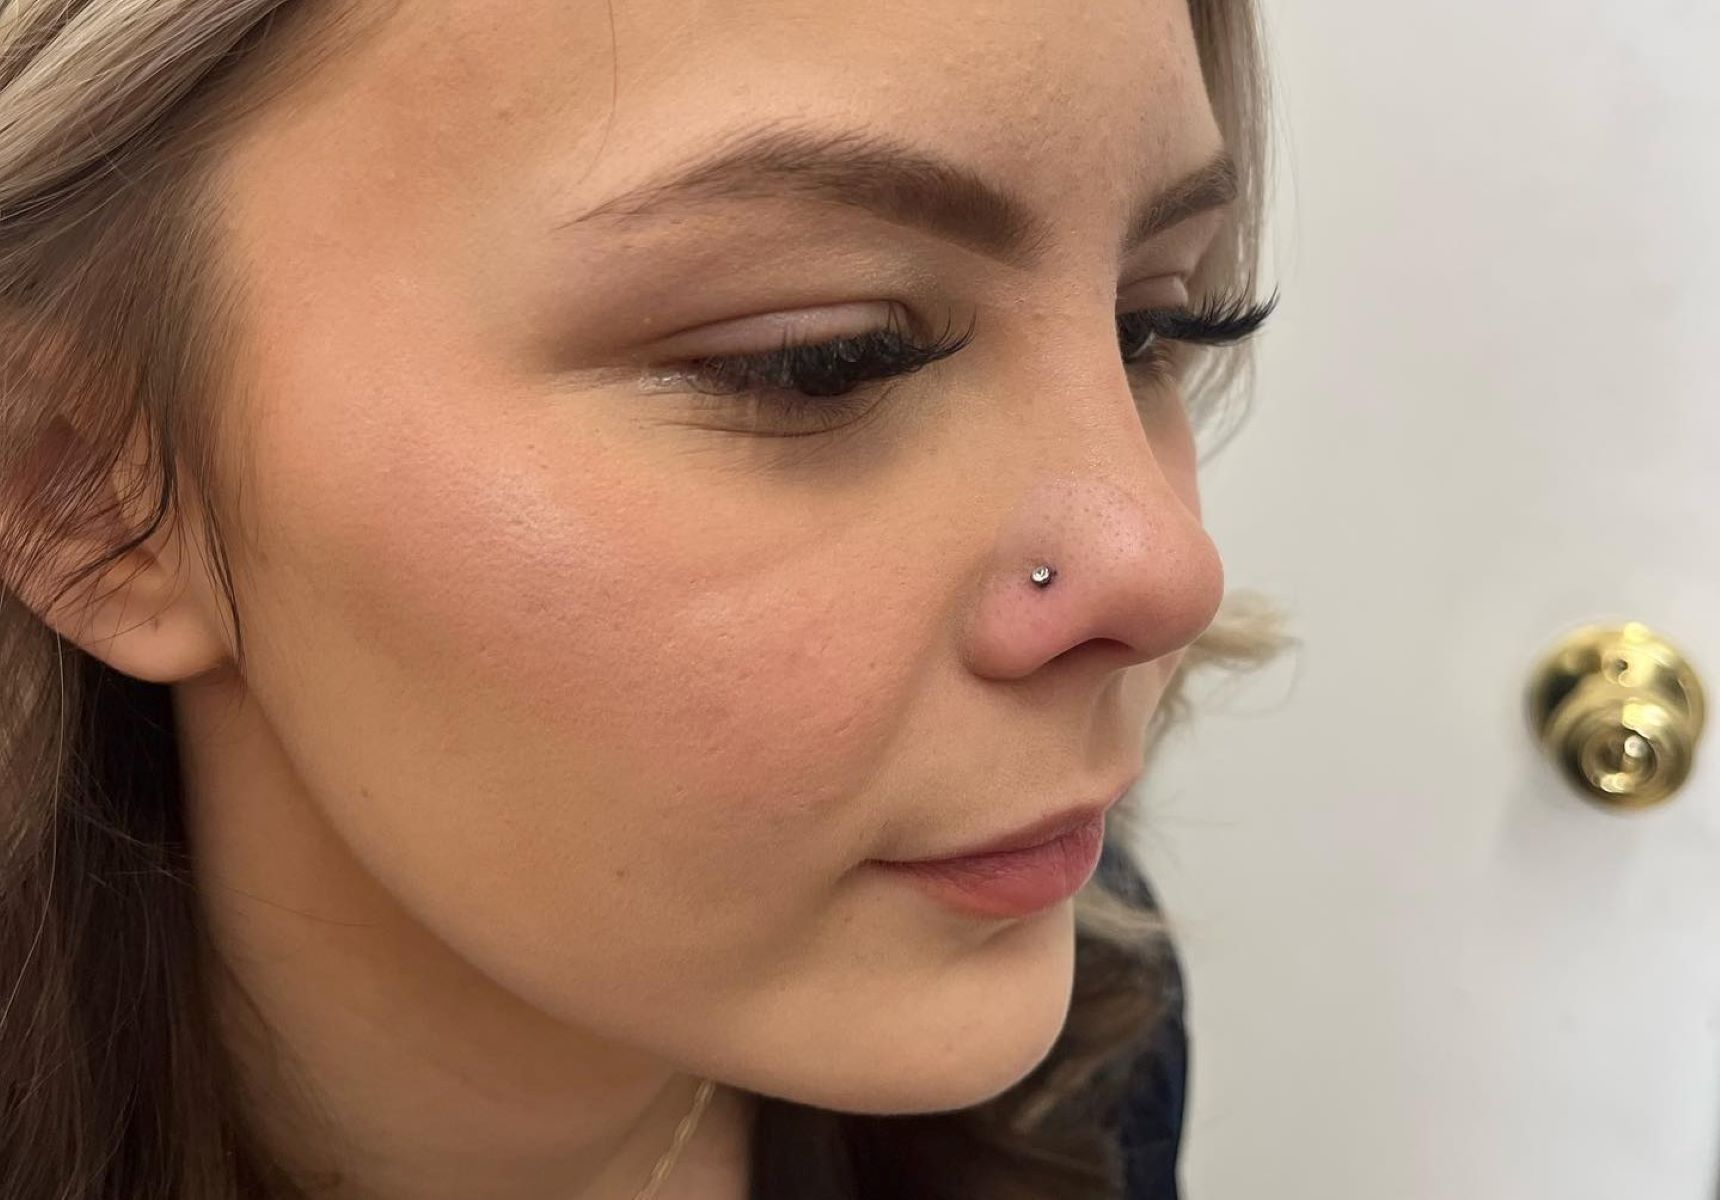 How To Prevent Your Nose Piercing From Sinking Into Your Skin